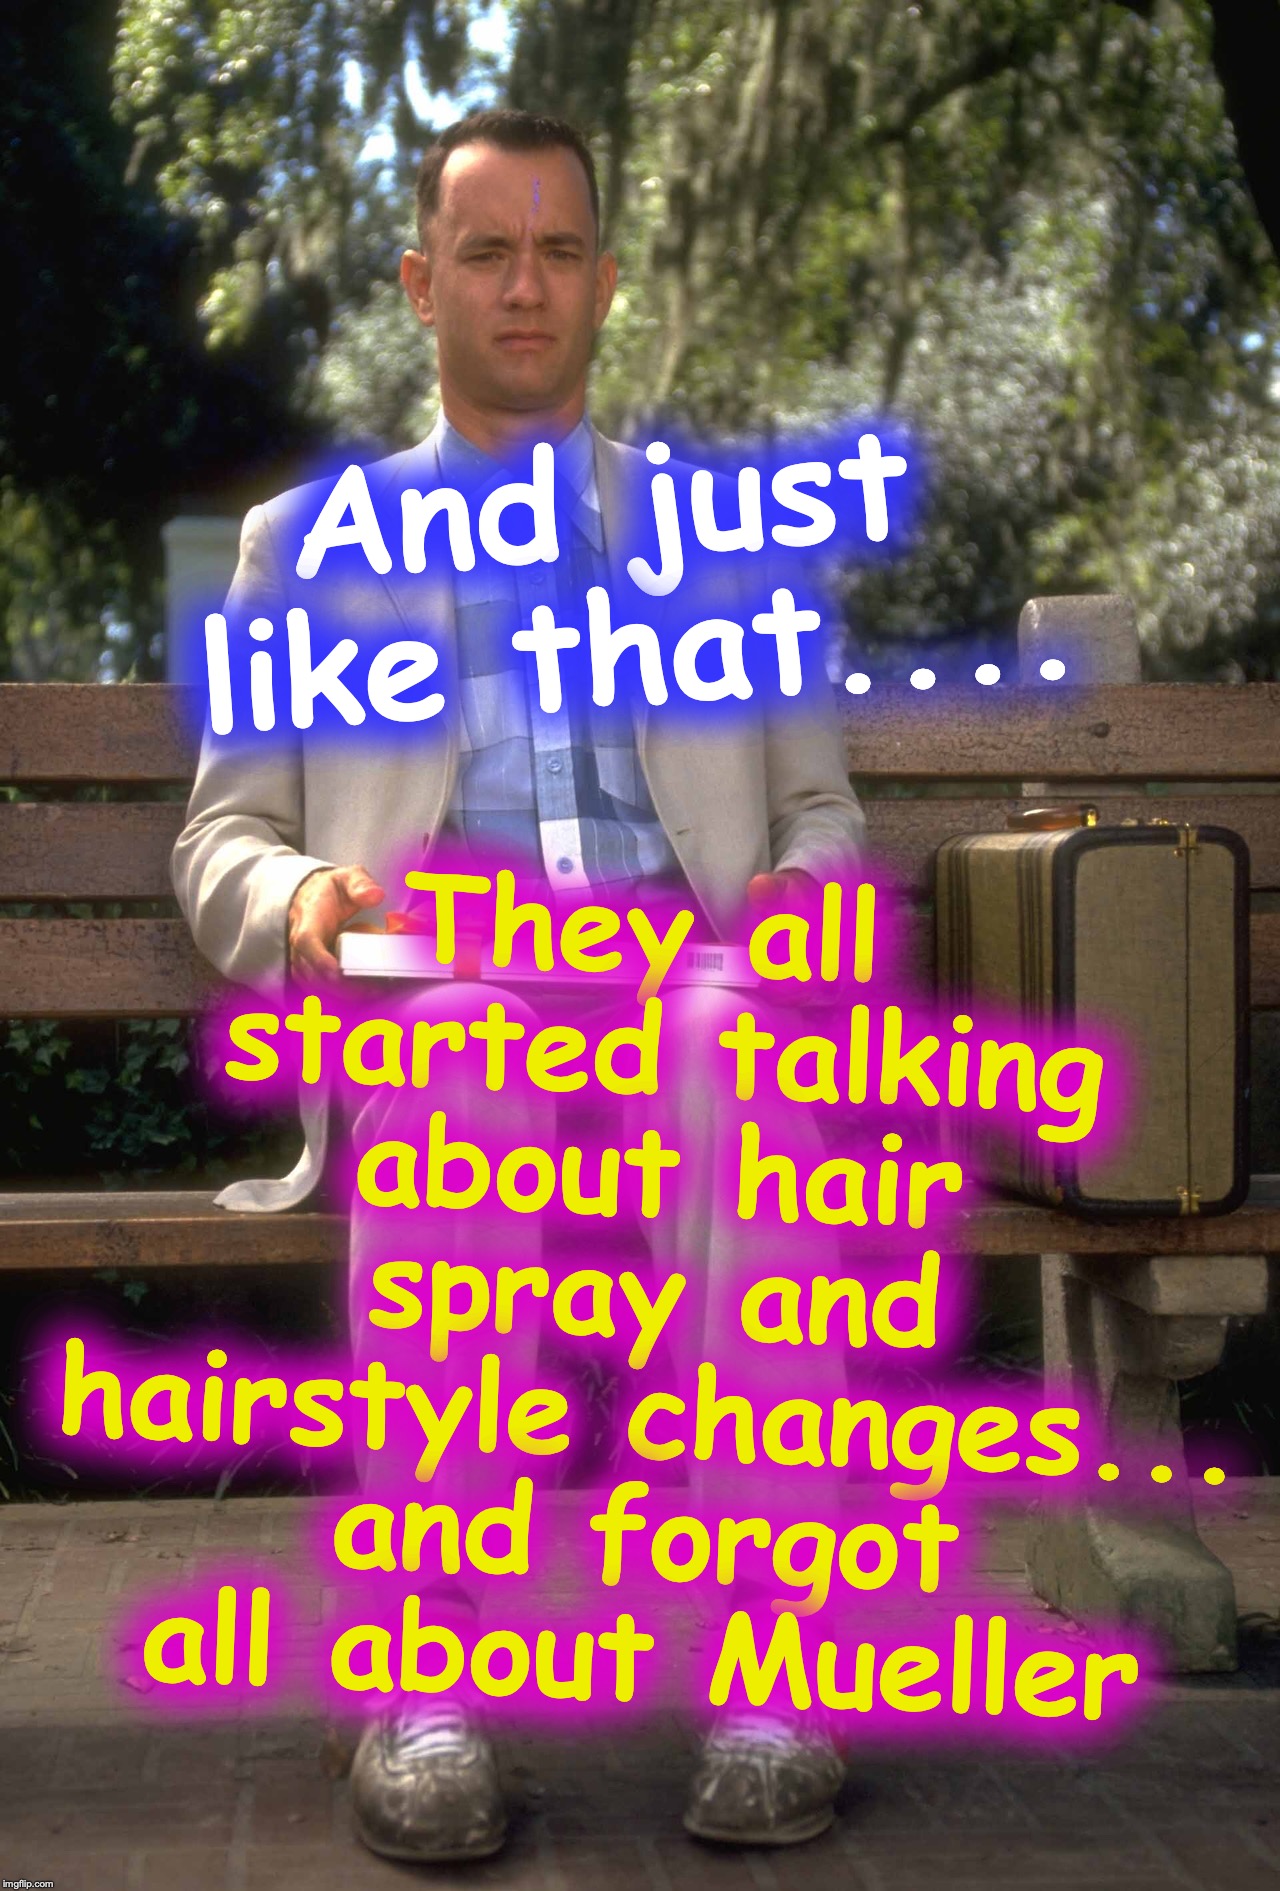 Forrest Gump | They all started talking about hair spray and hairstyle changes... and forgot all about Mueller; And just like that.... | image tagged in forrest gump | made w/ Imgflip meme maker